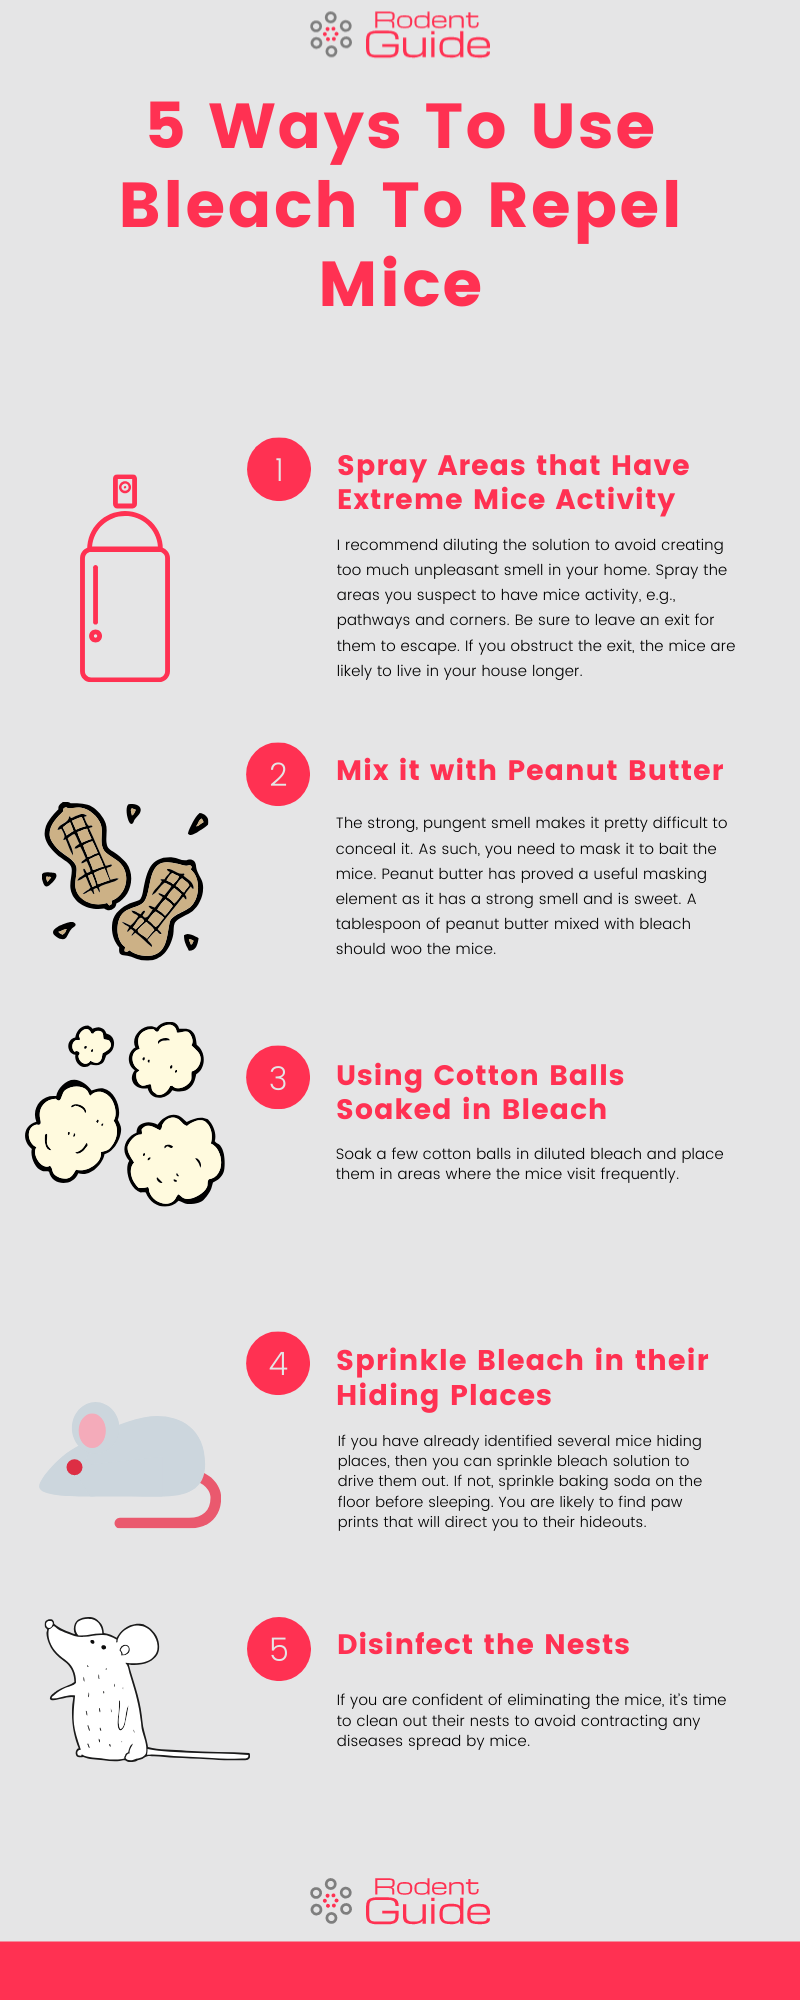 5 Ways To Use Bleach To Repel Mice Infographic